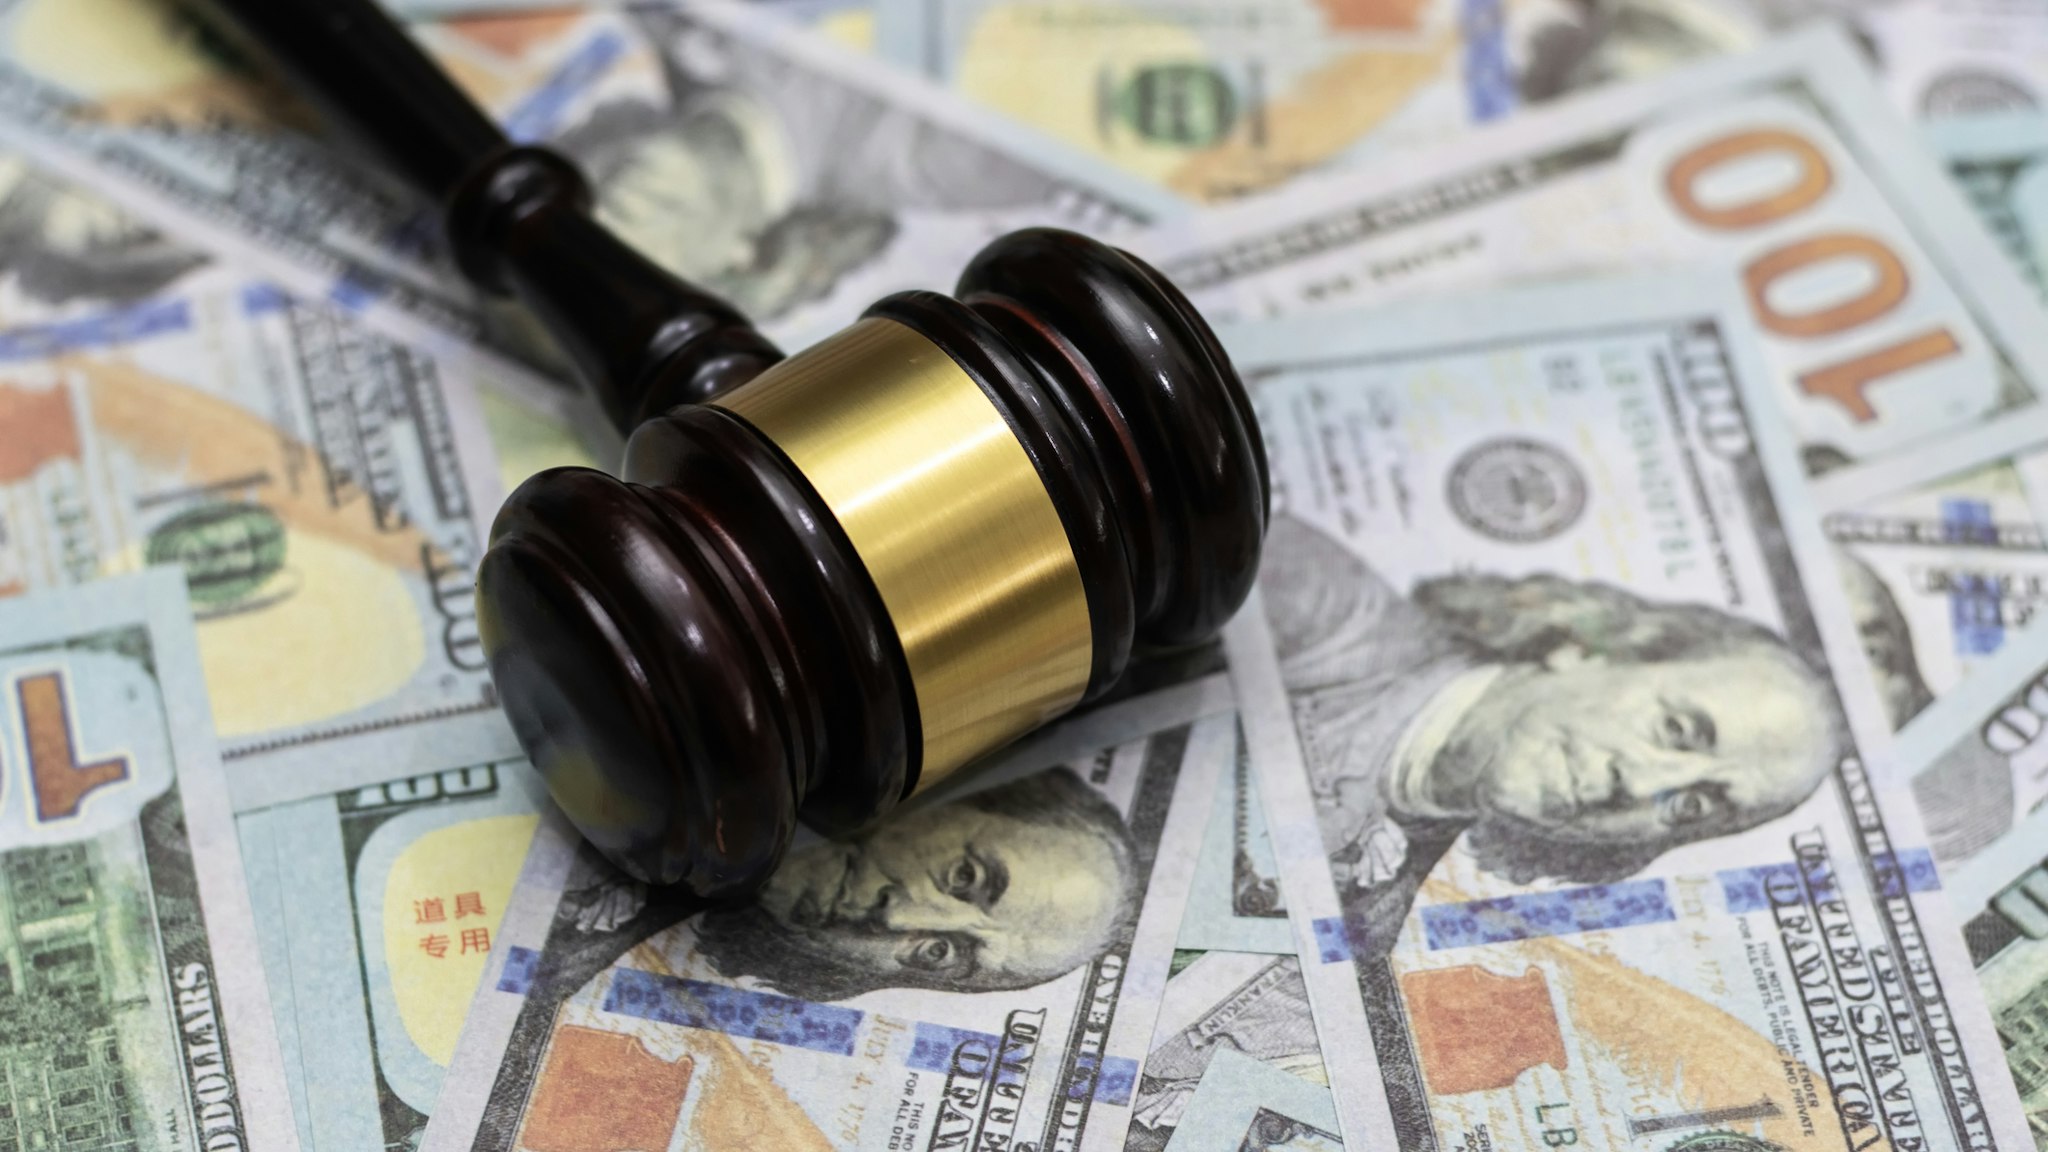 Money and hammer,Wooden gavel and dollar banknotes - stock photo